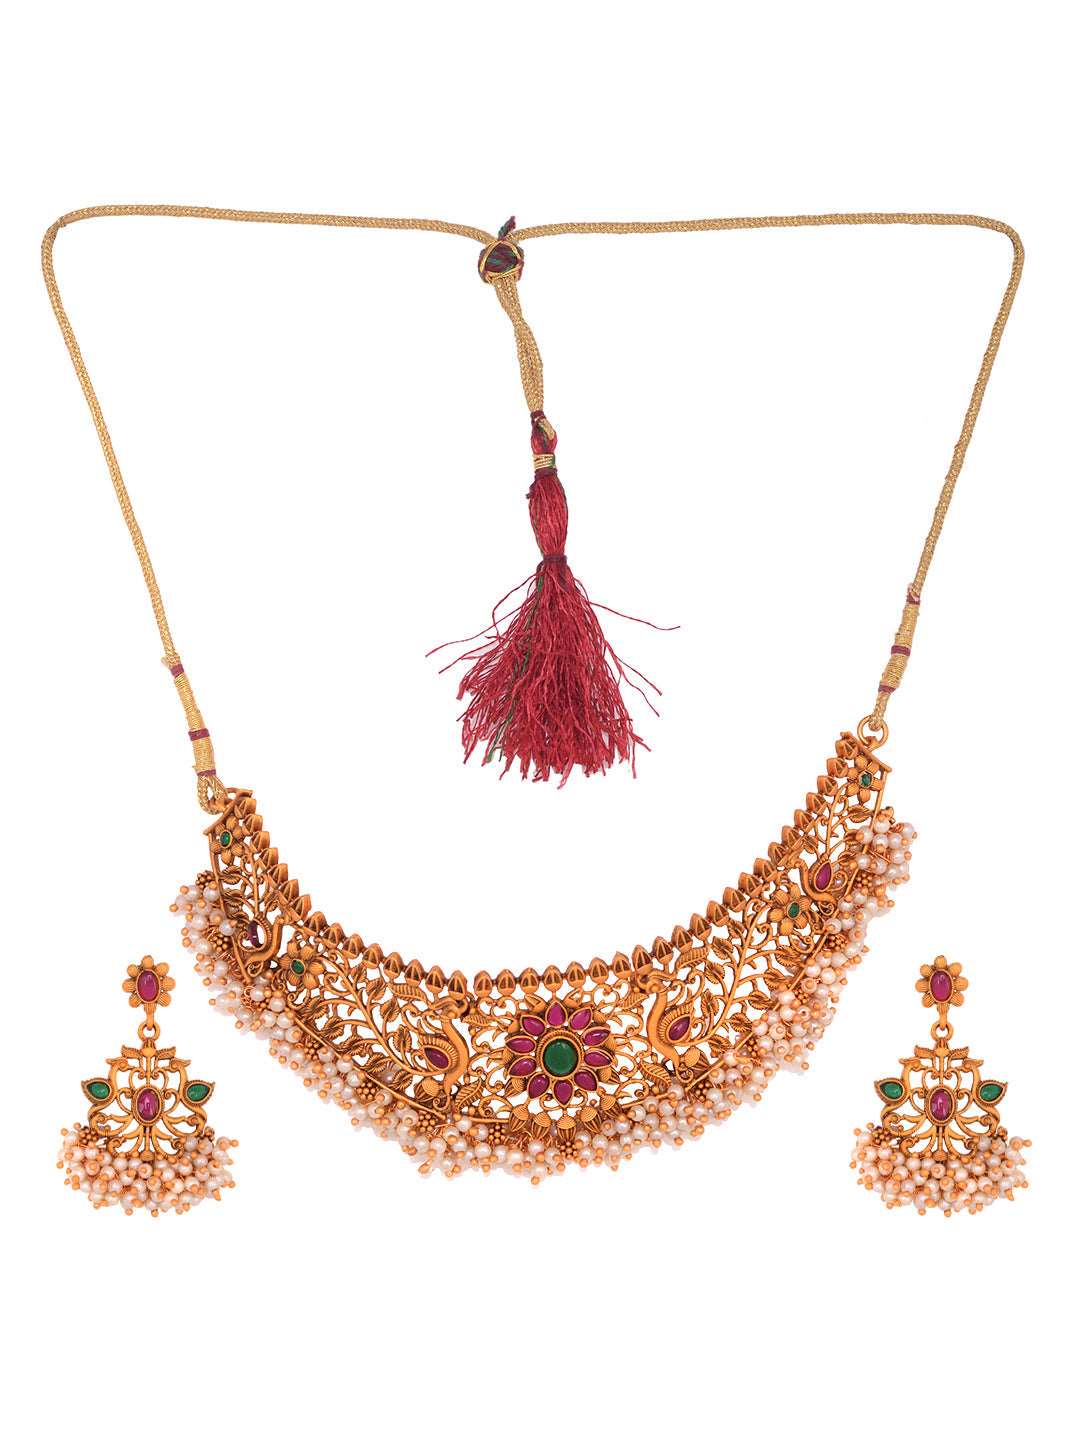 Gold Plated Red Kempo & Pearl Beaded Temple Choker Necklace Set, zaveri pearls, sale price rs, sale price, sale gold plated, sale gold, sale, rubans, ring, regular price, priyassi jewellery, 